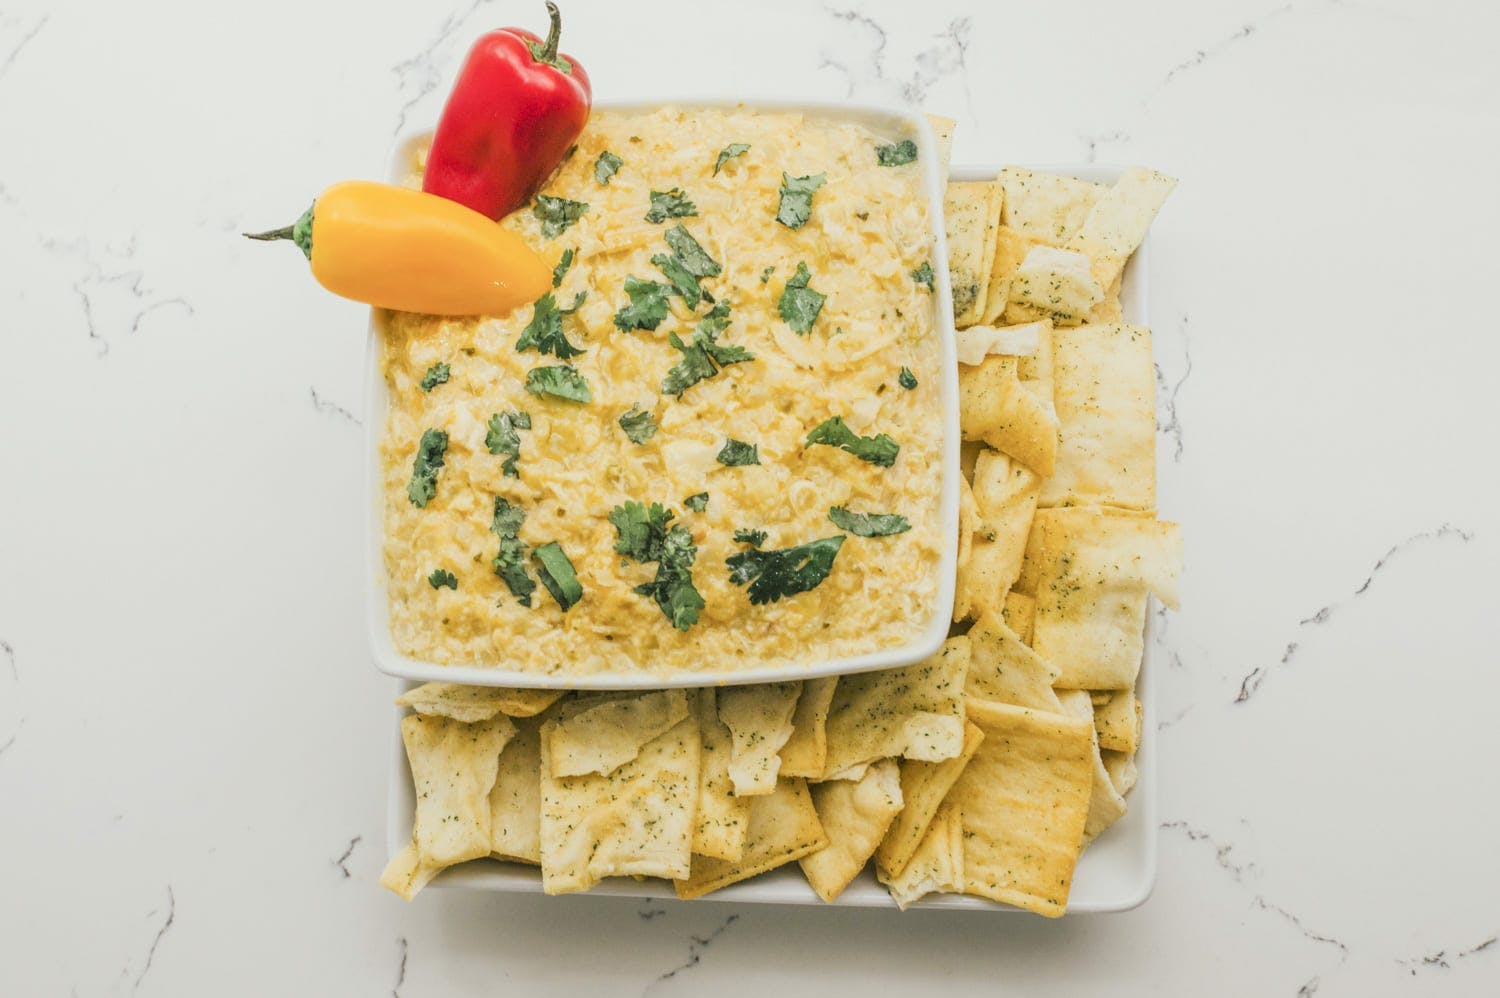 The Holly Furtick recipe: 'Low Carb Chicken Enchilada Bake'